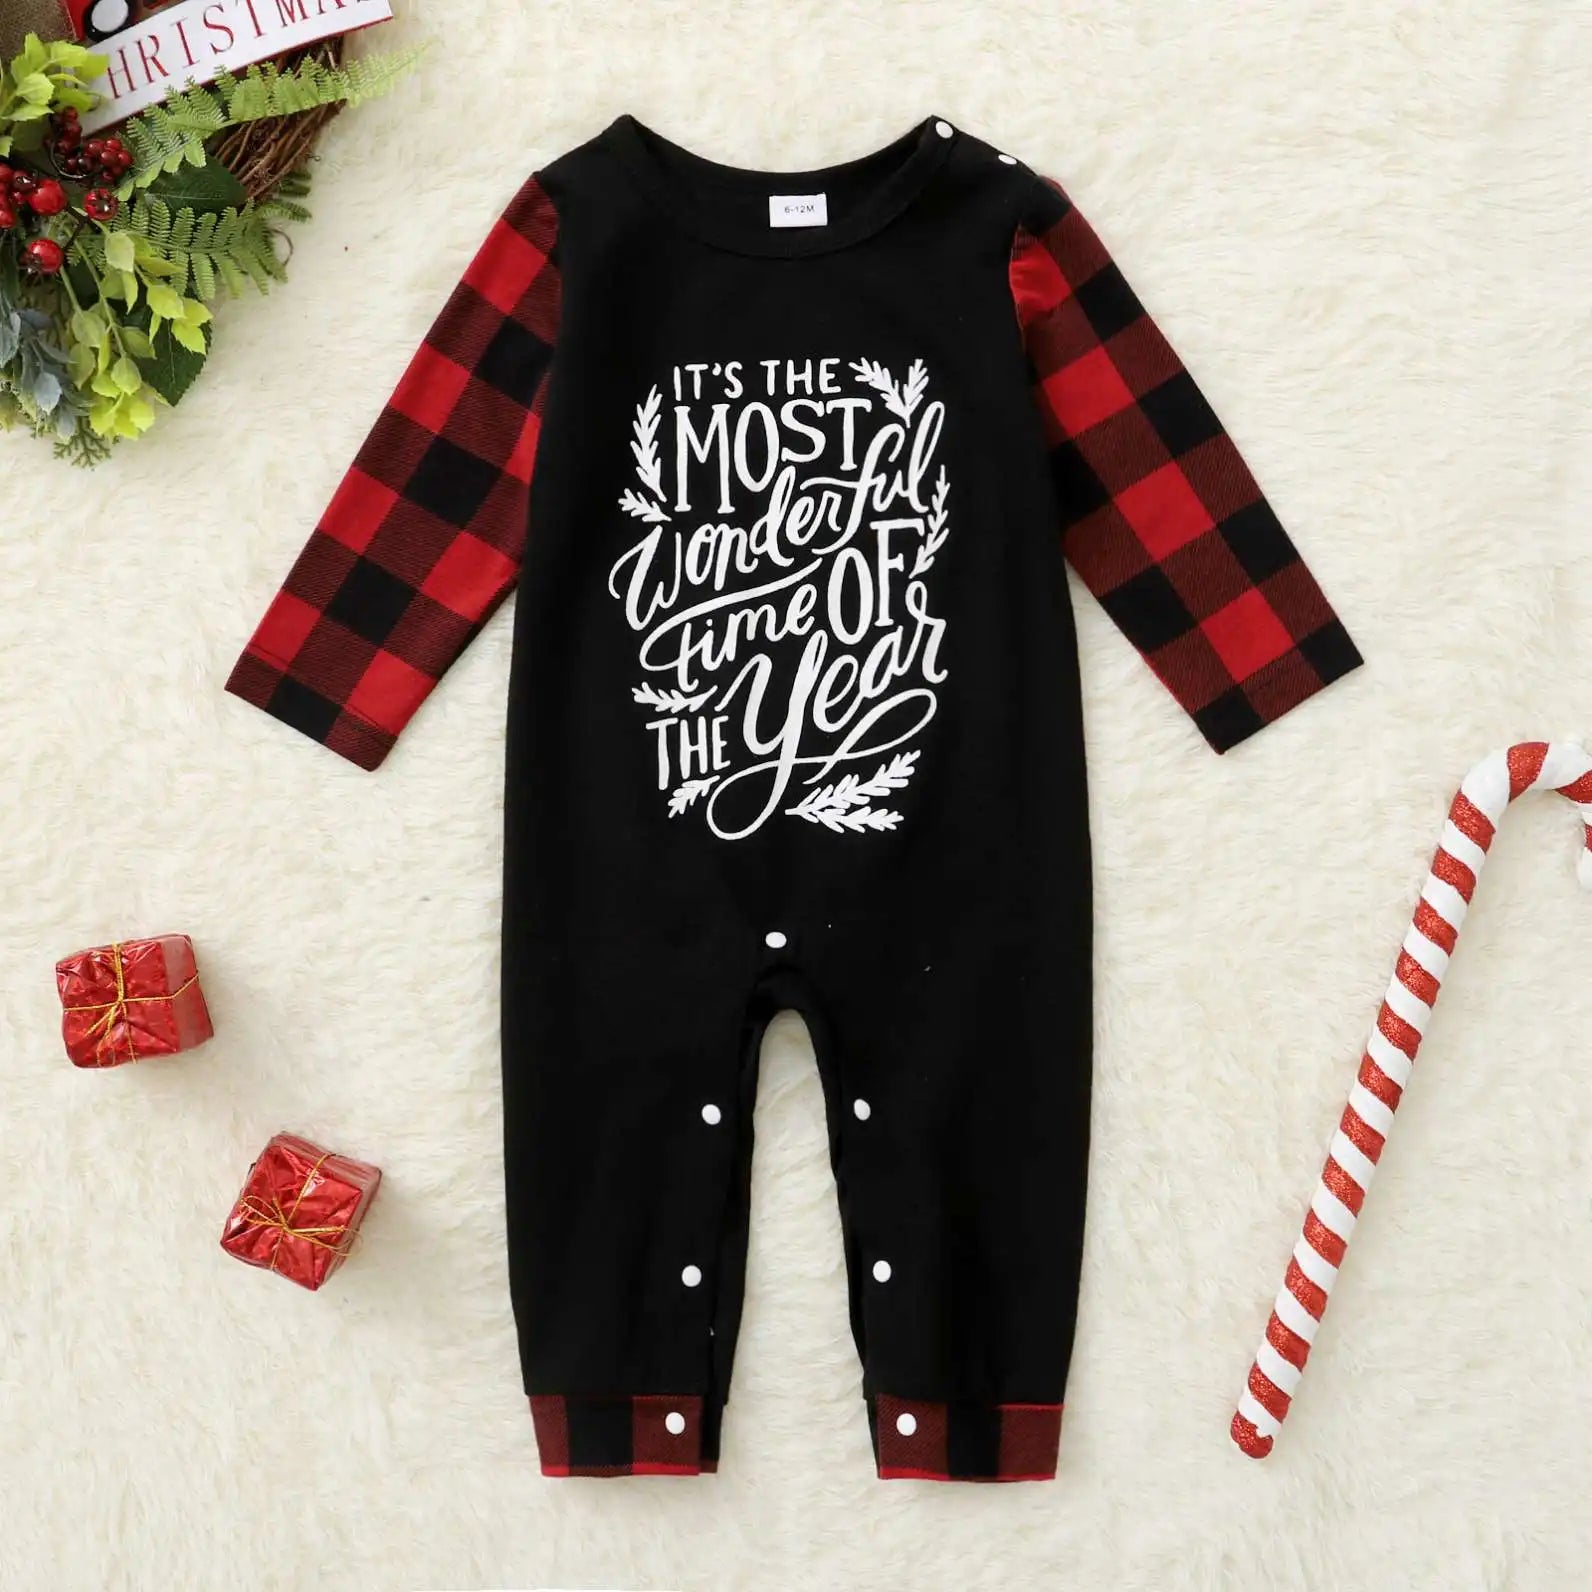 Custom Family Pajamas Best Christmas Pajamas Holiday Matching outfit for Family Sleepwear Homewear for Baby Kids Mom Dad Catpapa